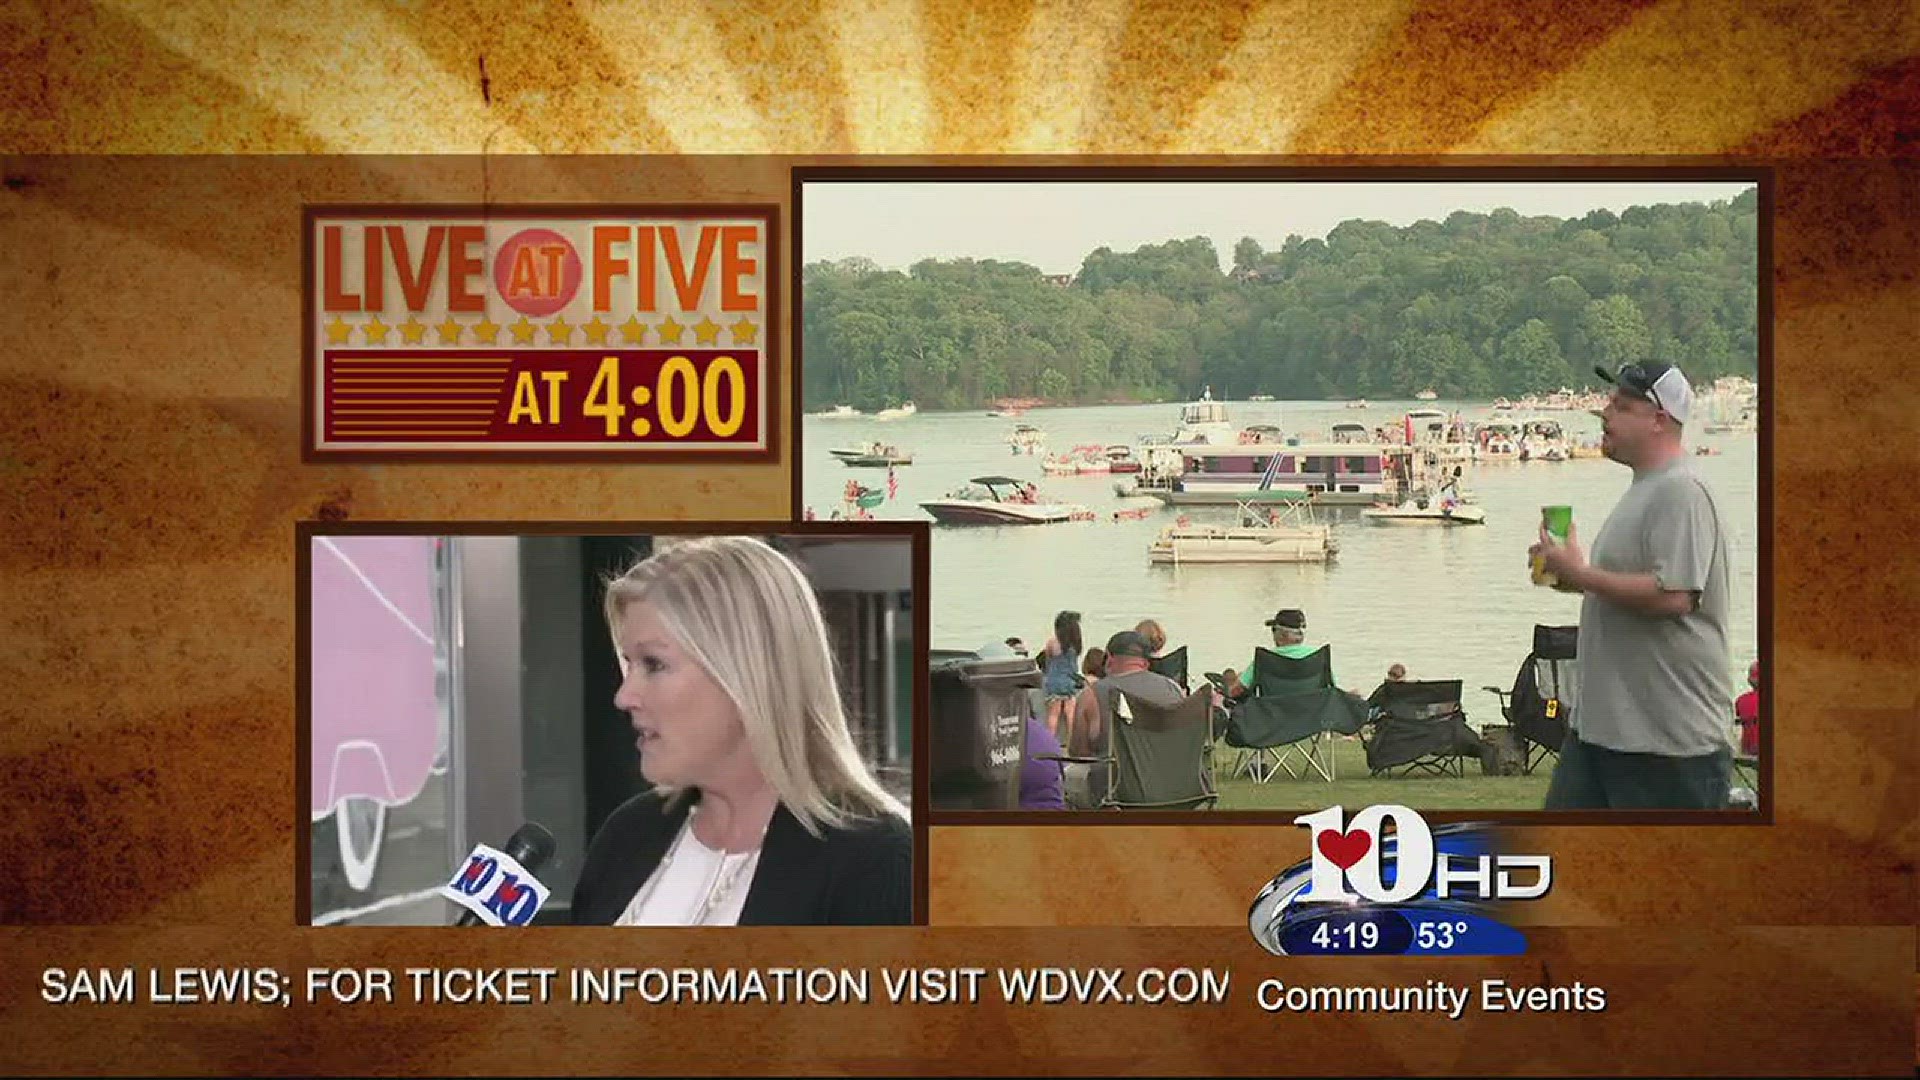 The Loudon County Visitors Bureau discusses some upcoming events in the area including the annual Rockin' the Docks. For more information visit visitloudoncounty.comLive at Five at 4-February 13, 2017